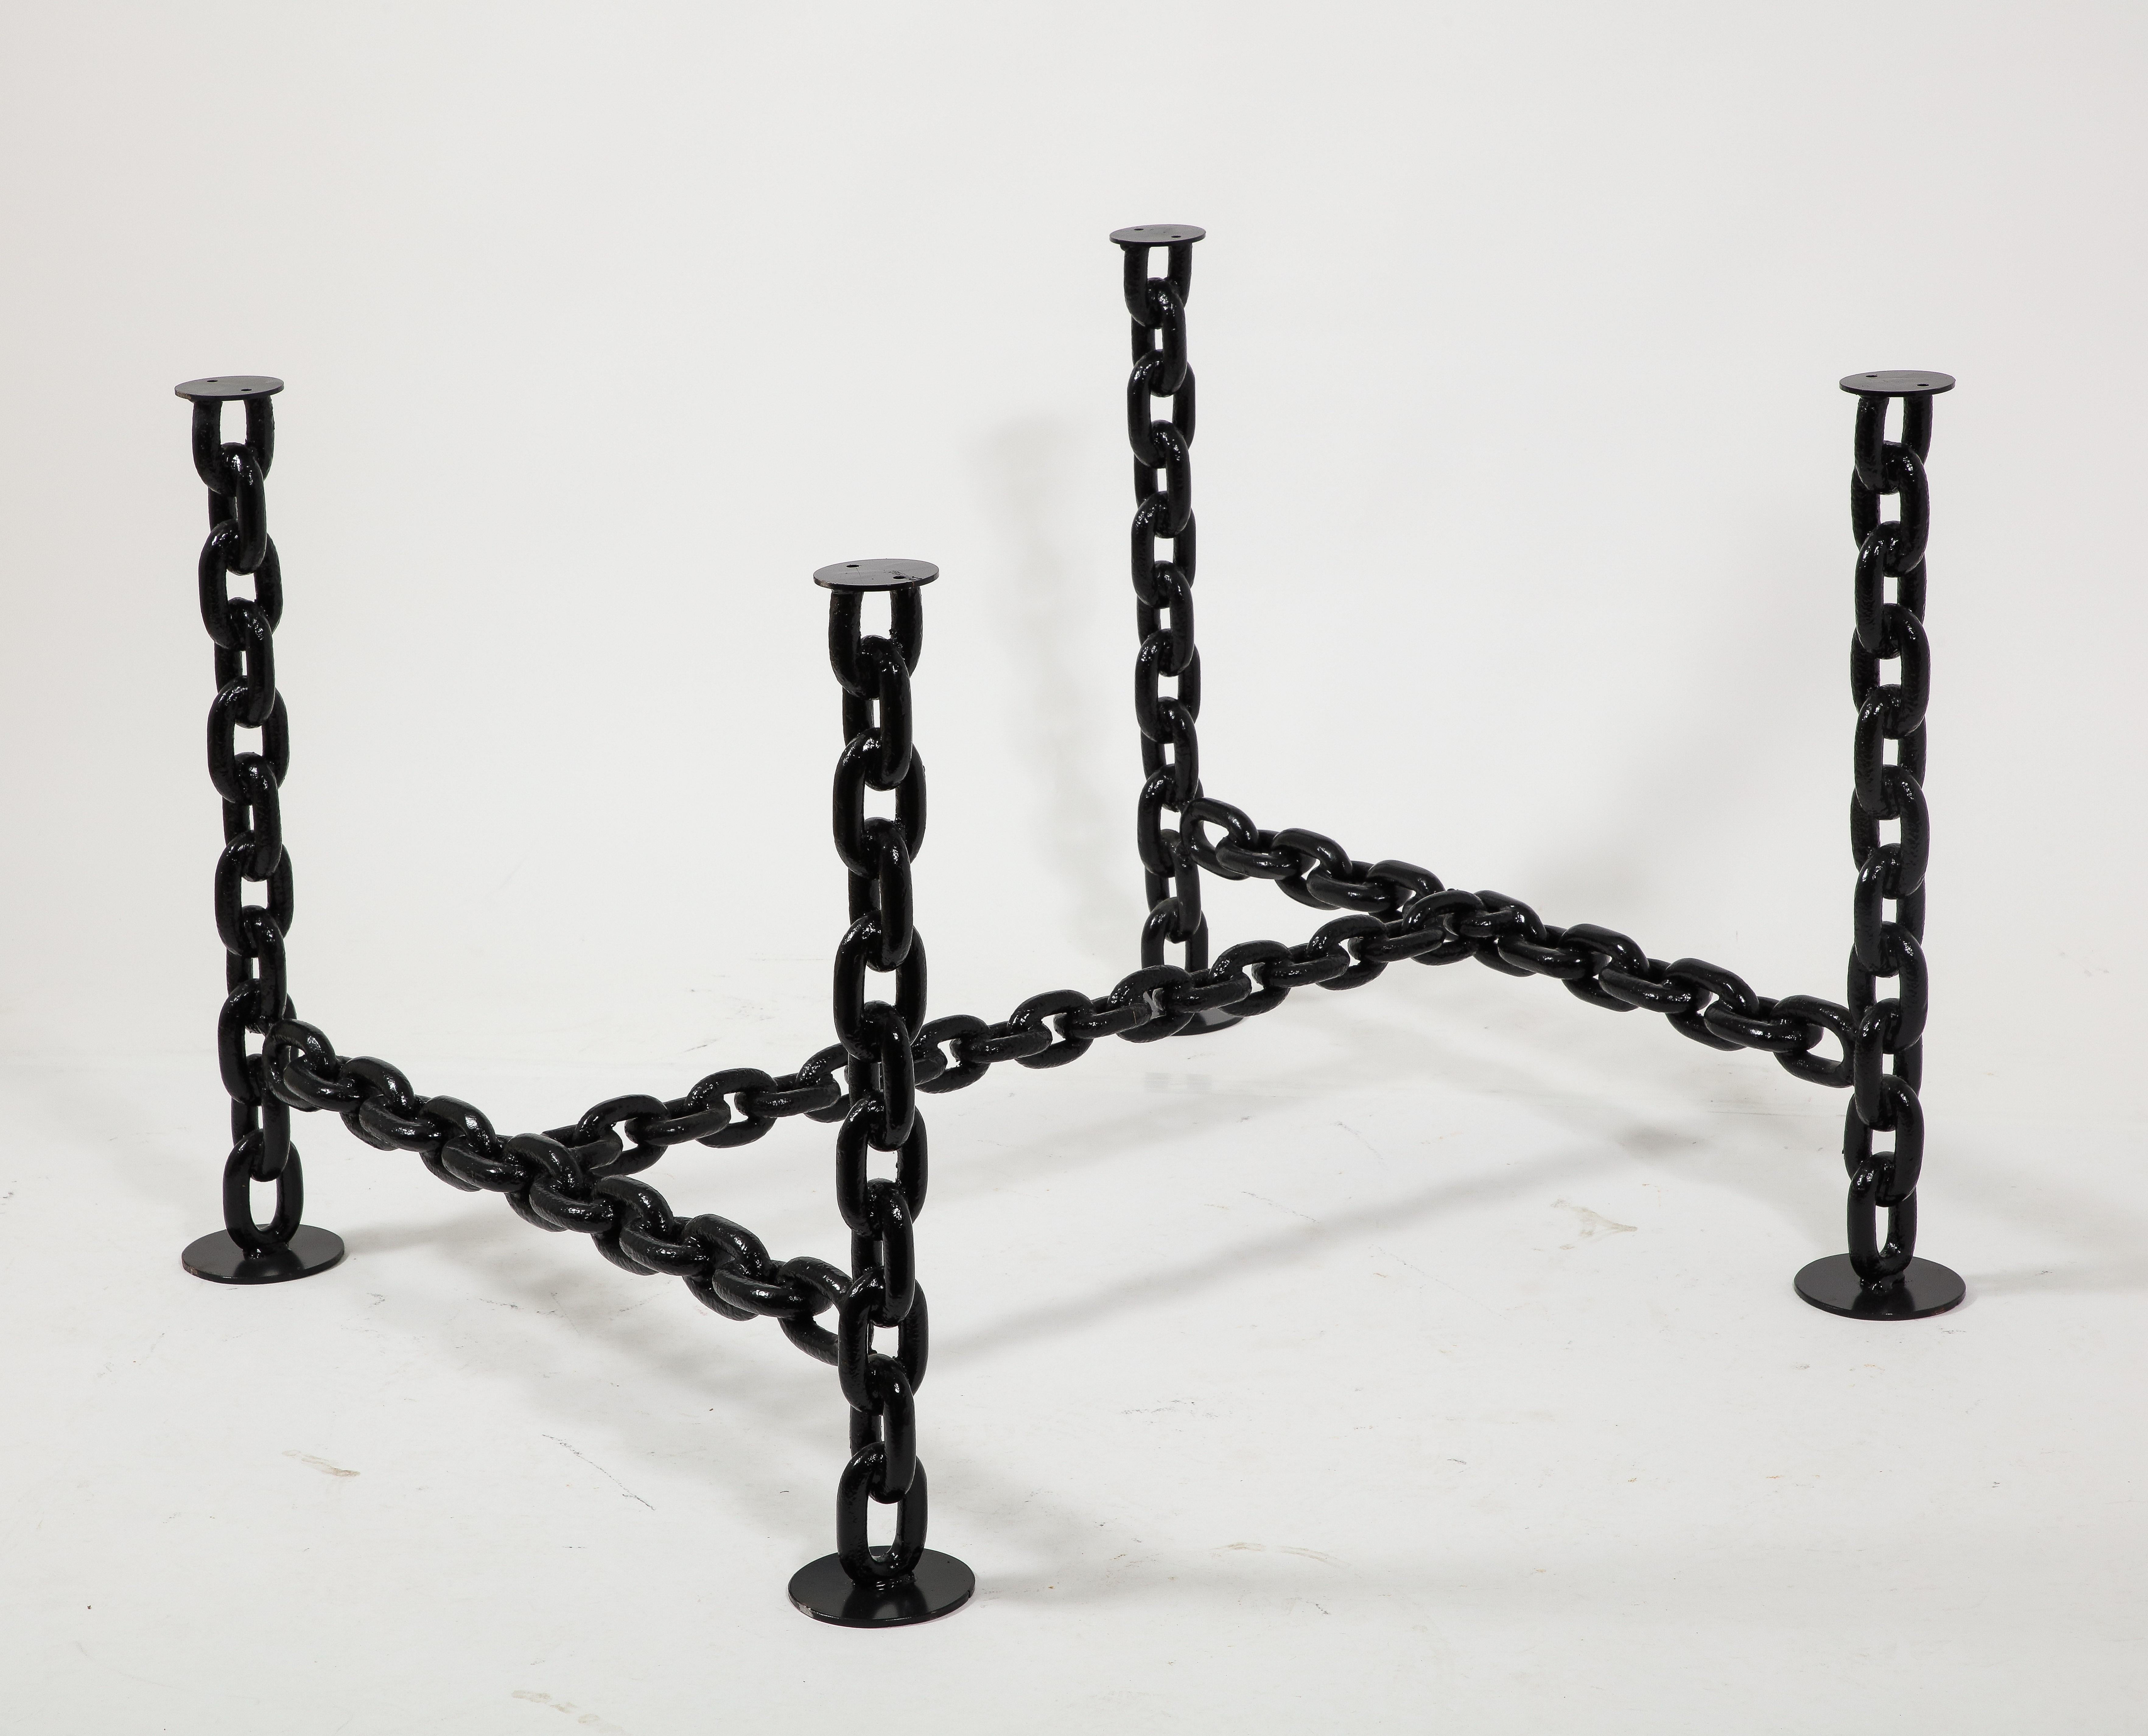 Steel Black Lacquered Brutalist Marine Chains Dining Table Structure - France 1970s For Sale